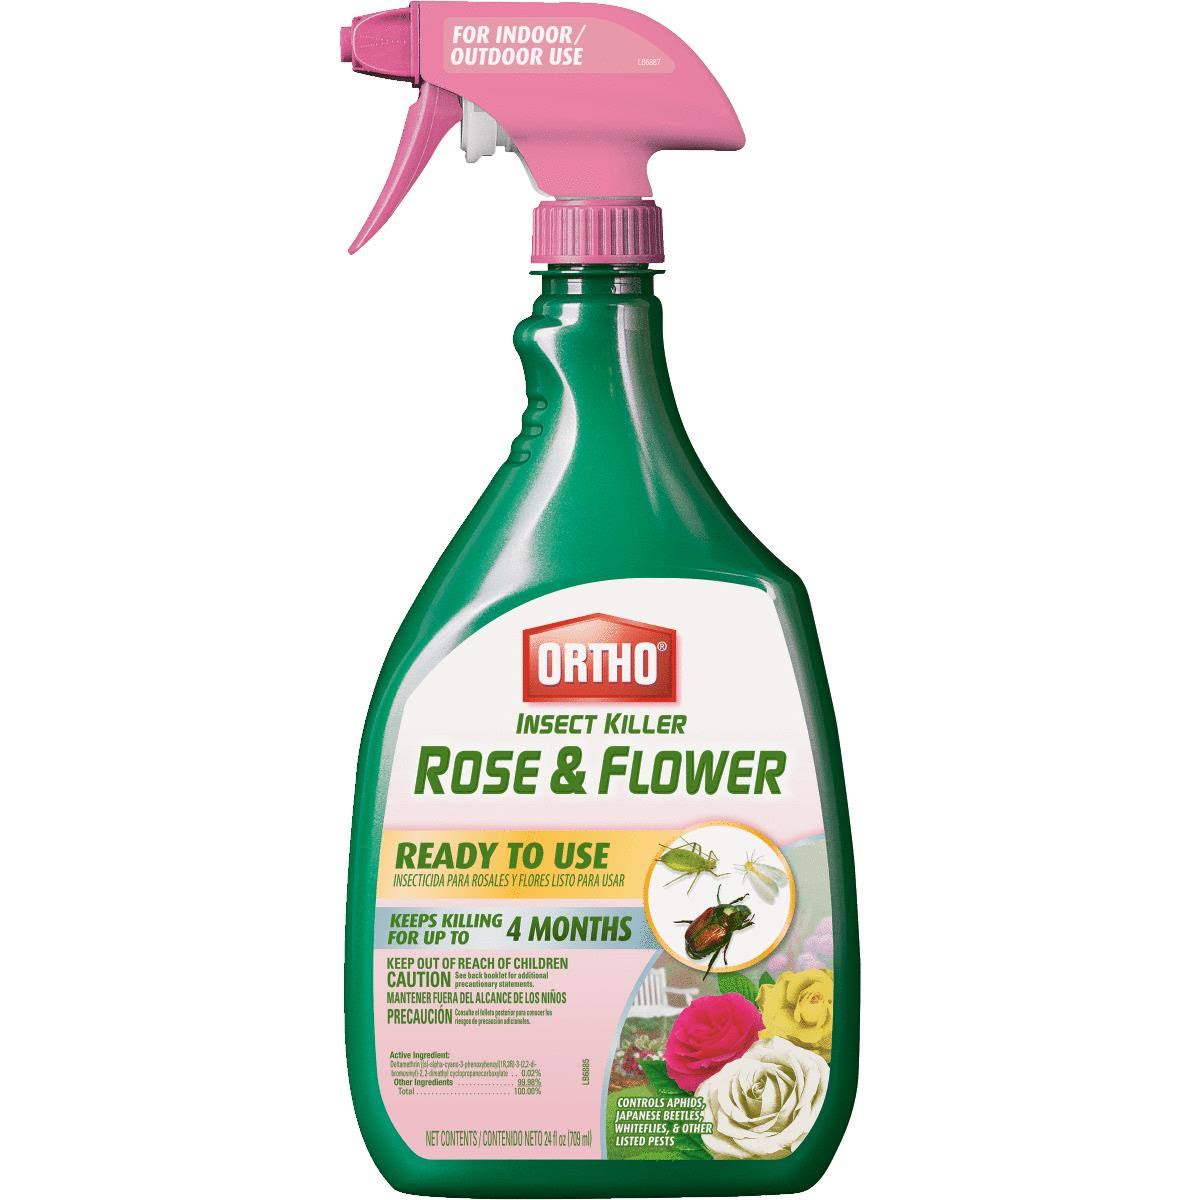 Scotts Ortho Roundup Ready To Use Rose and Flower Insect Killer Spray - 24oz